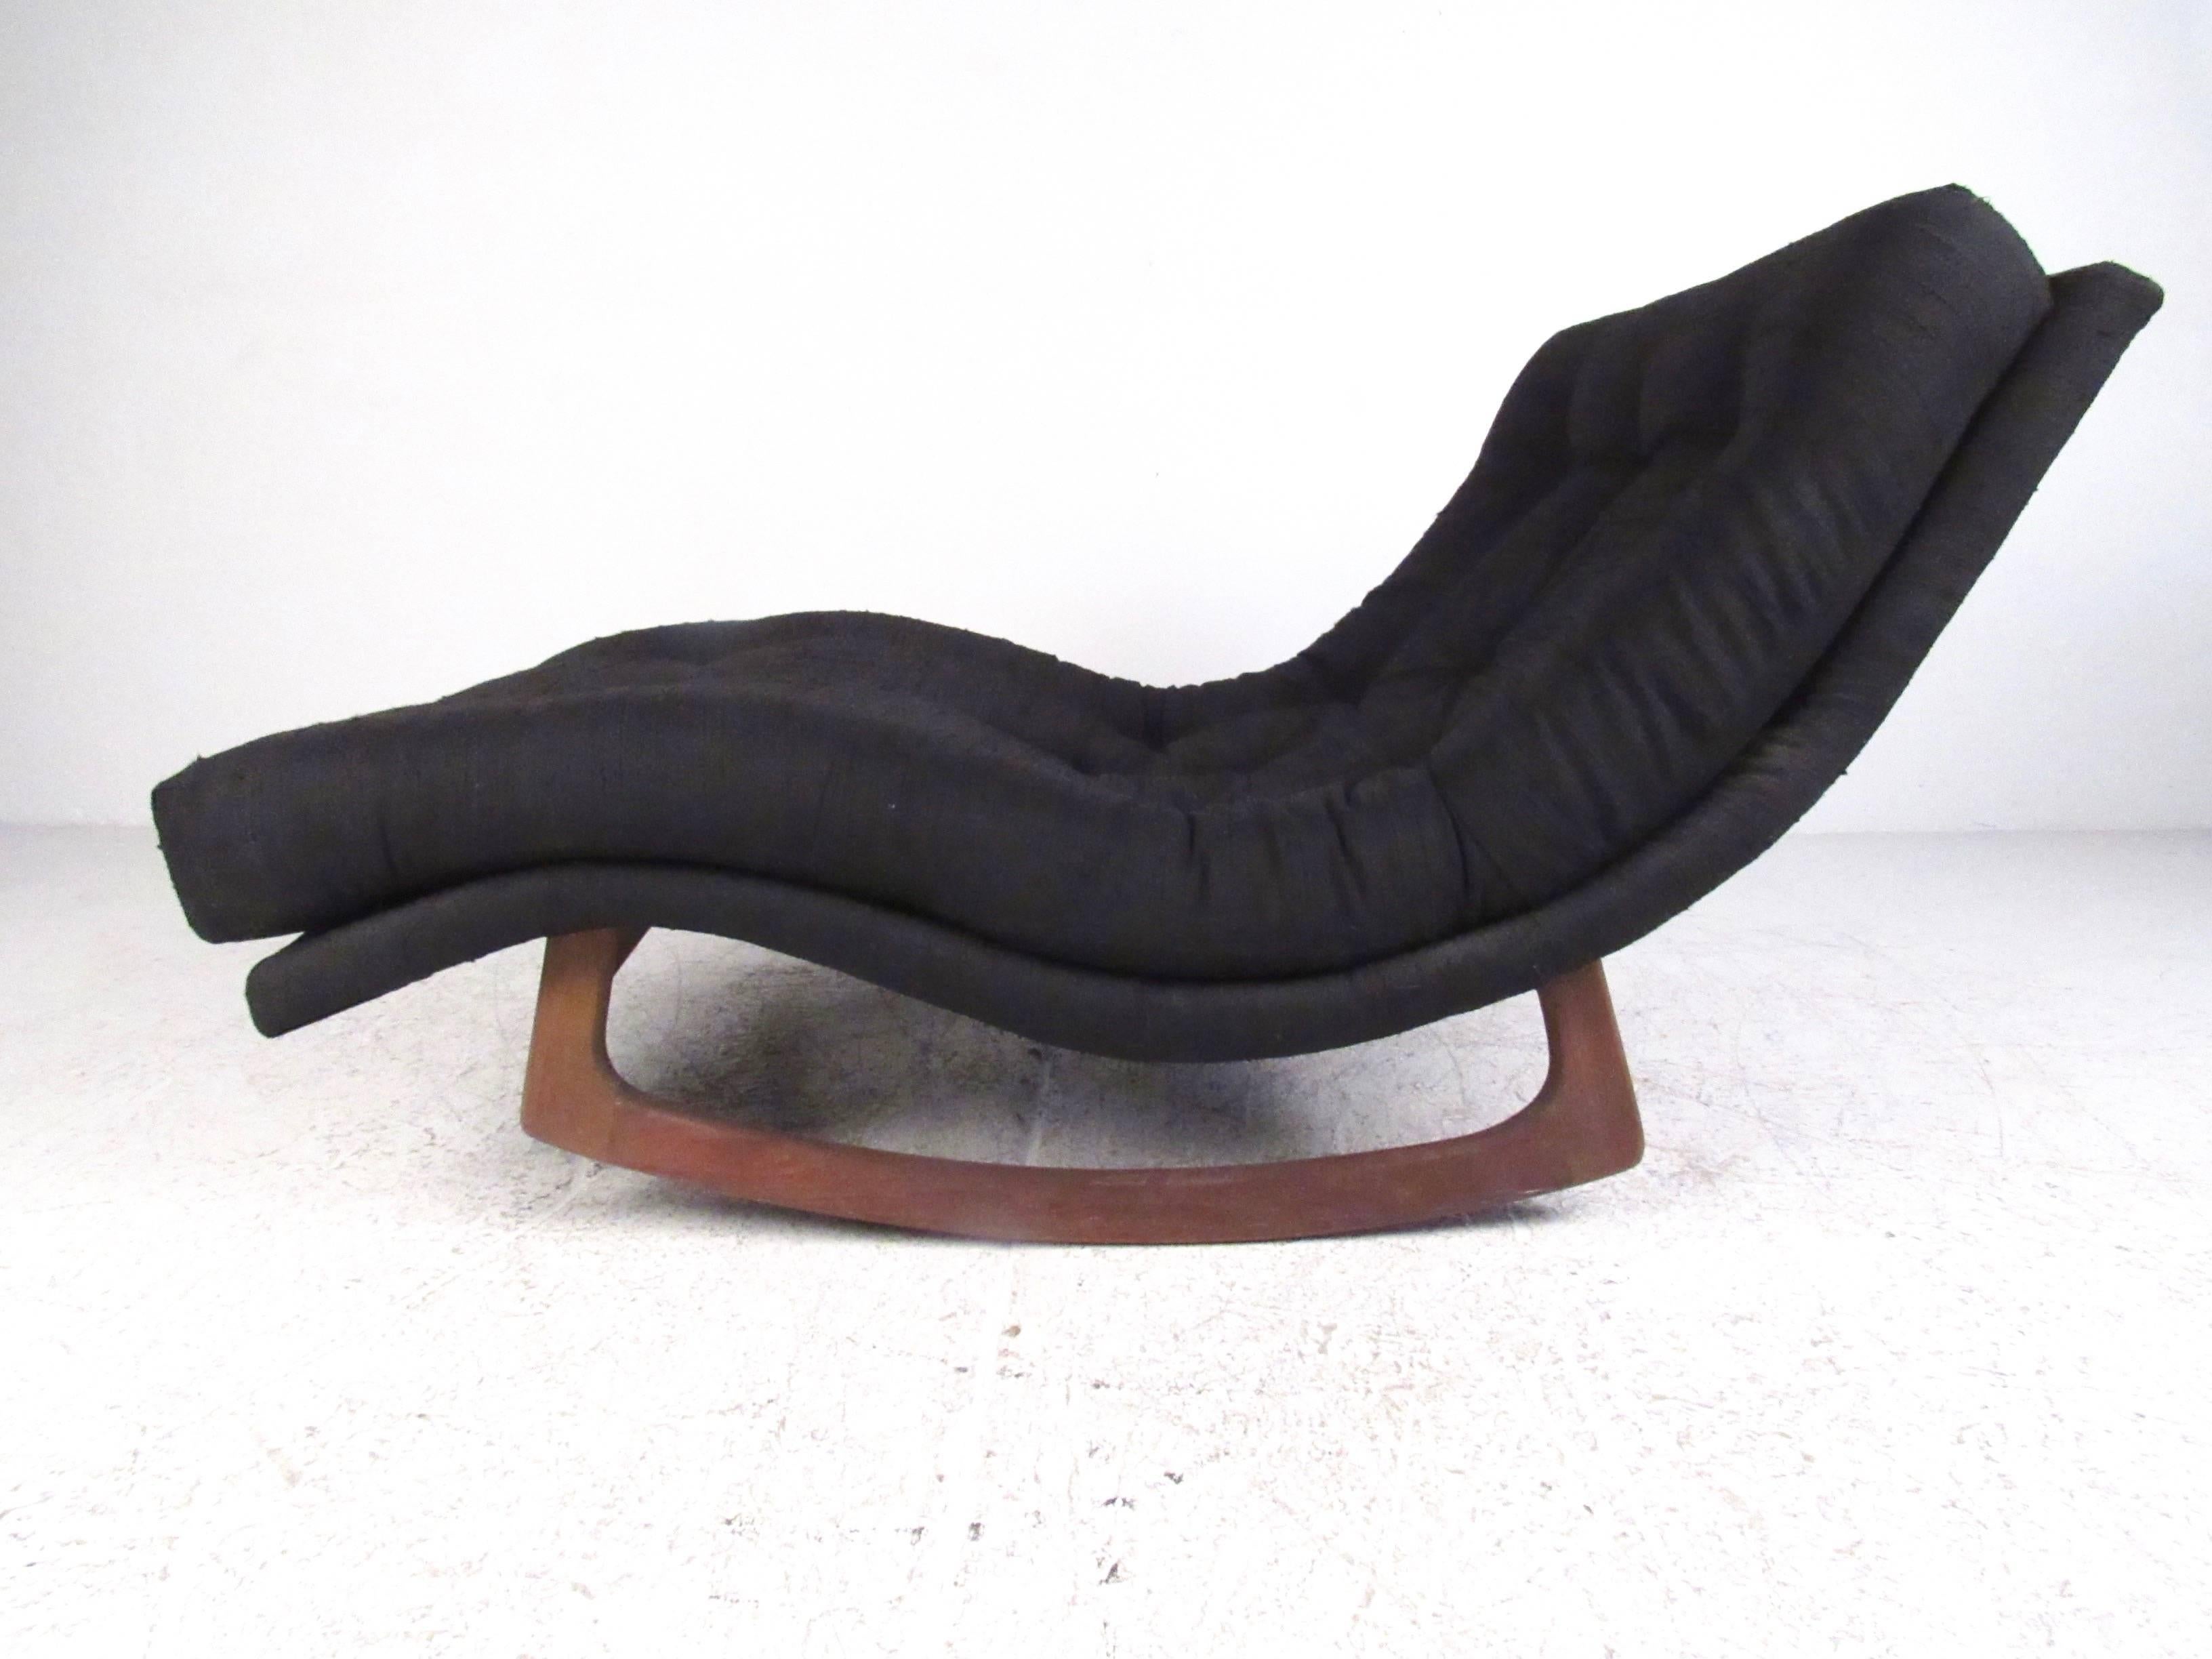 This stylish wave style lounge chair features tufted fabric and comfortable sculpted chaise design. Walnut rocking base sets this Adrian Pearsall rocking chaise longue apart from other vintage options, and makes it an impressive addition to any